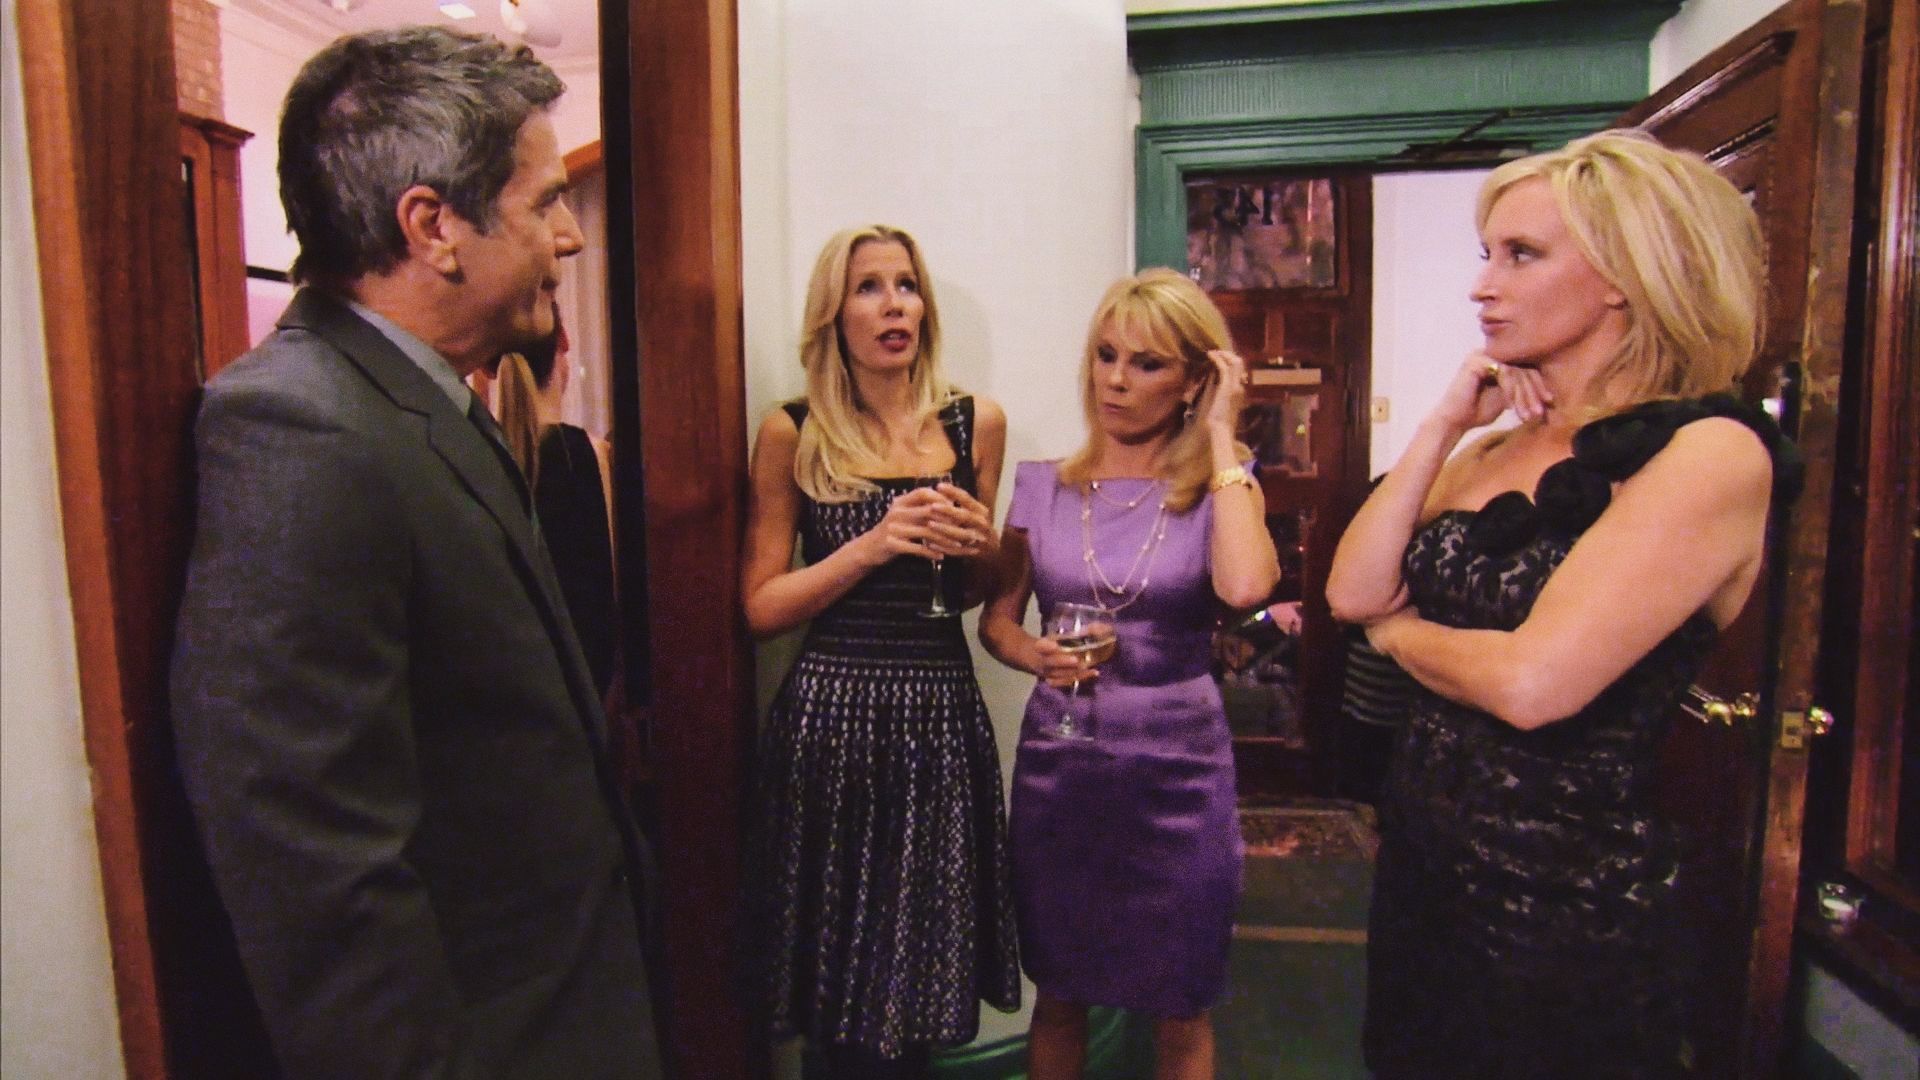 RHONY The Real Housewives of New York City S05E11 saison 5 épisode 11 This Party Is Toast